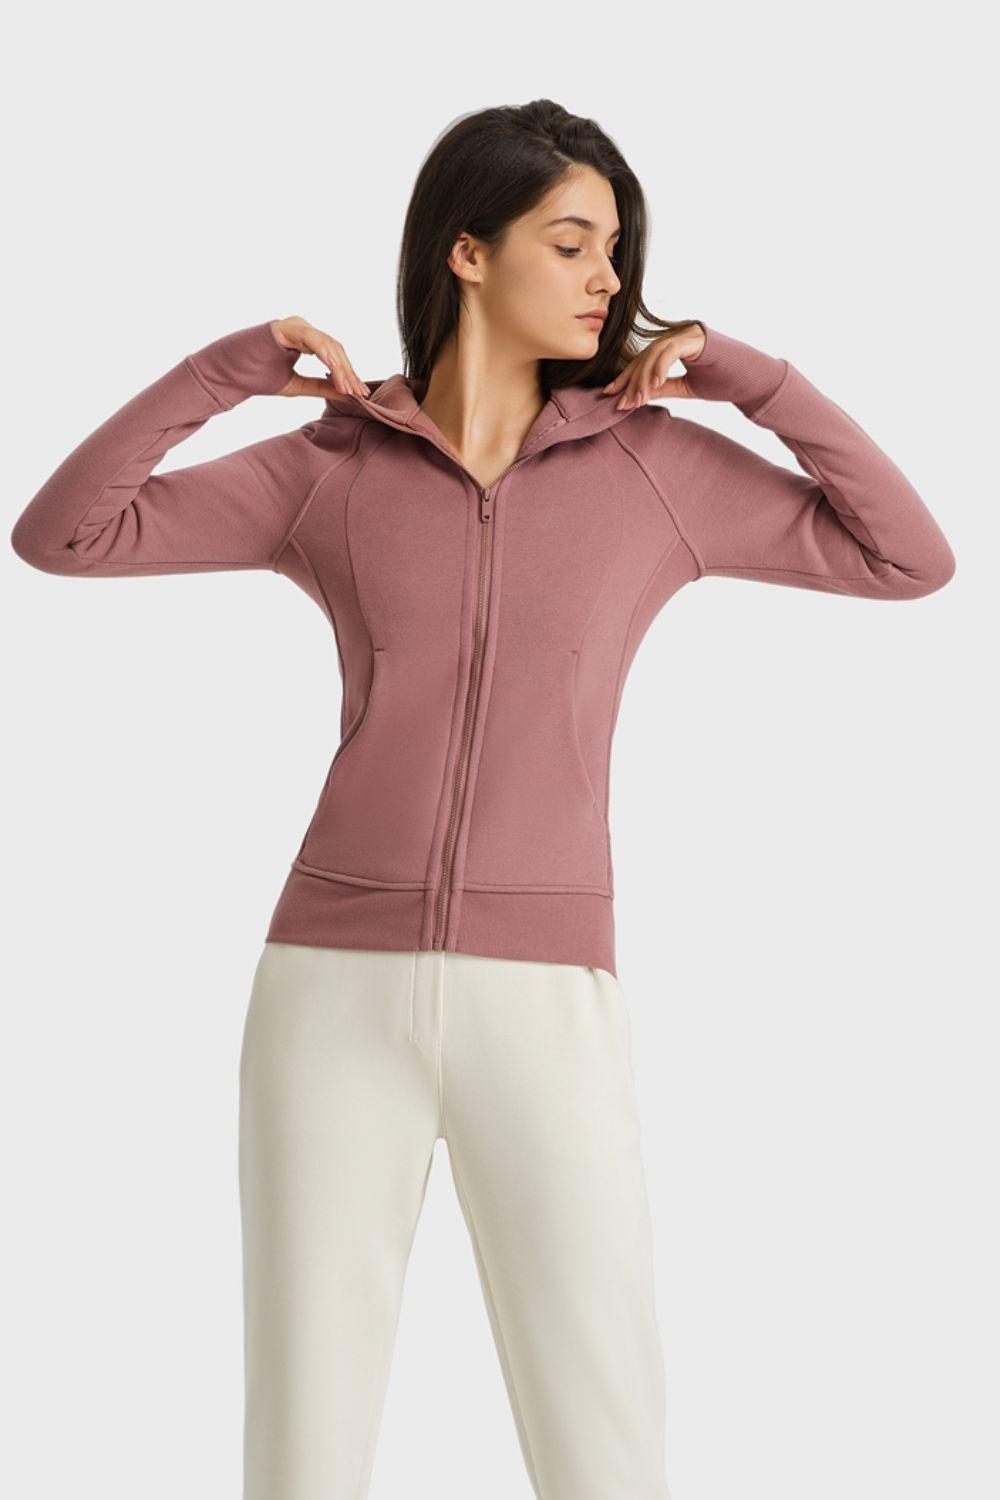 Zip Up Seam Detail Hooded Sports Jacket-TOPS / DRESSES-[Adult]-[Female]-Dusty Pink-4-Blue Zone Planet